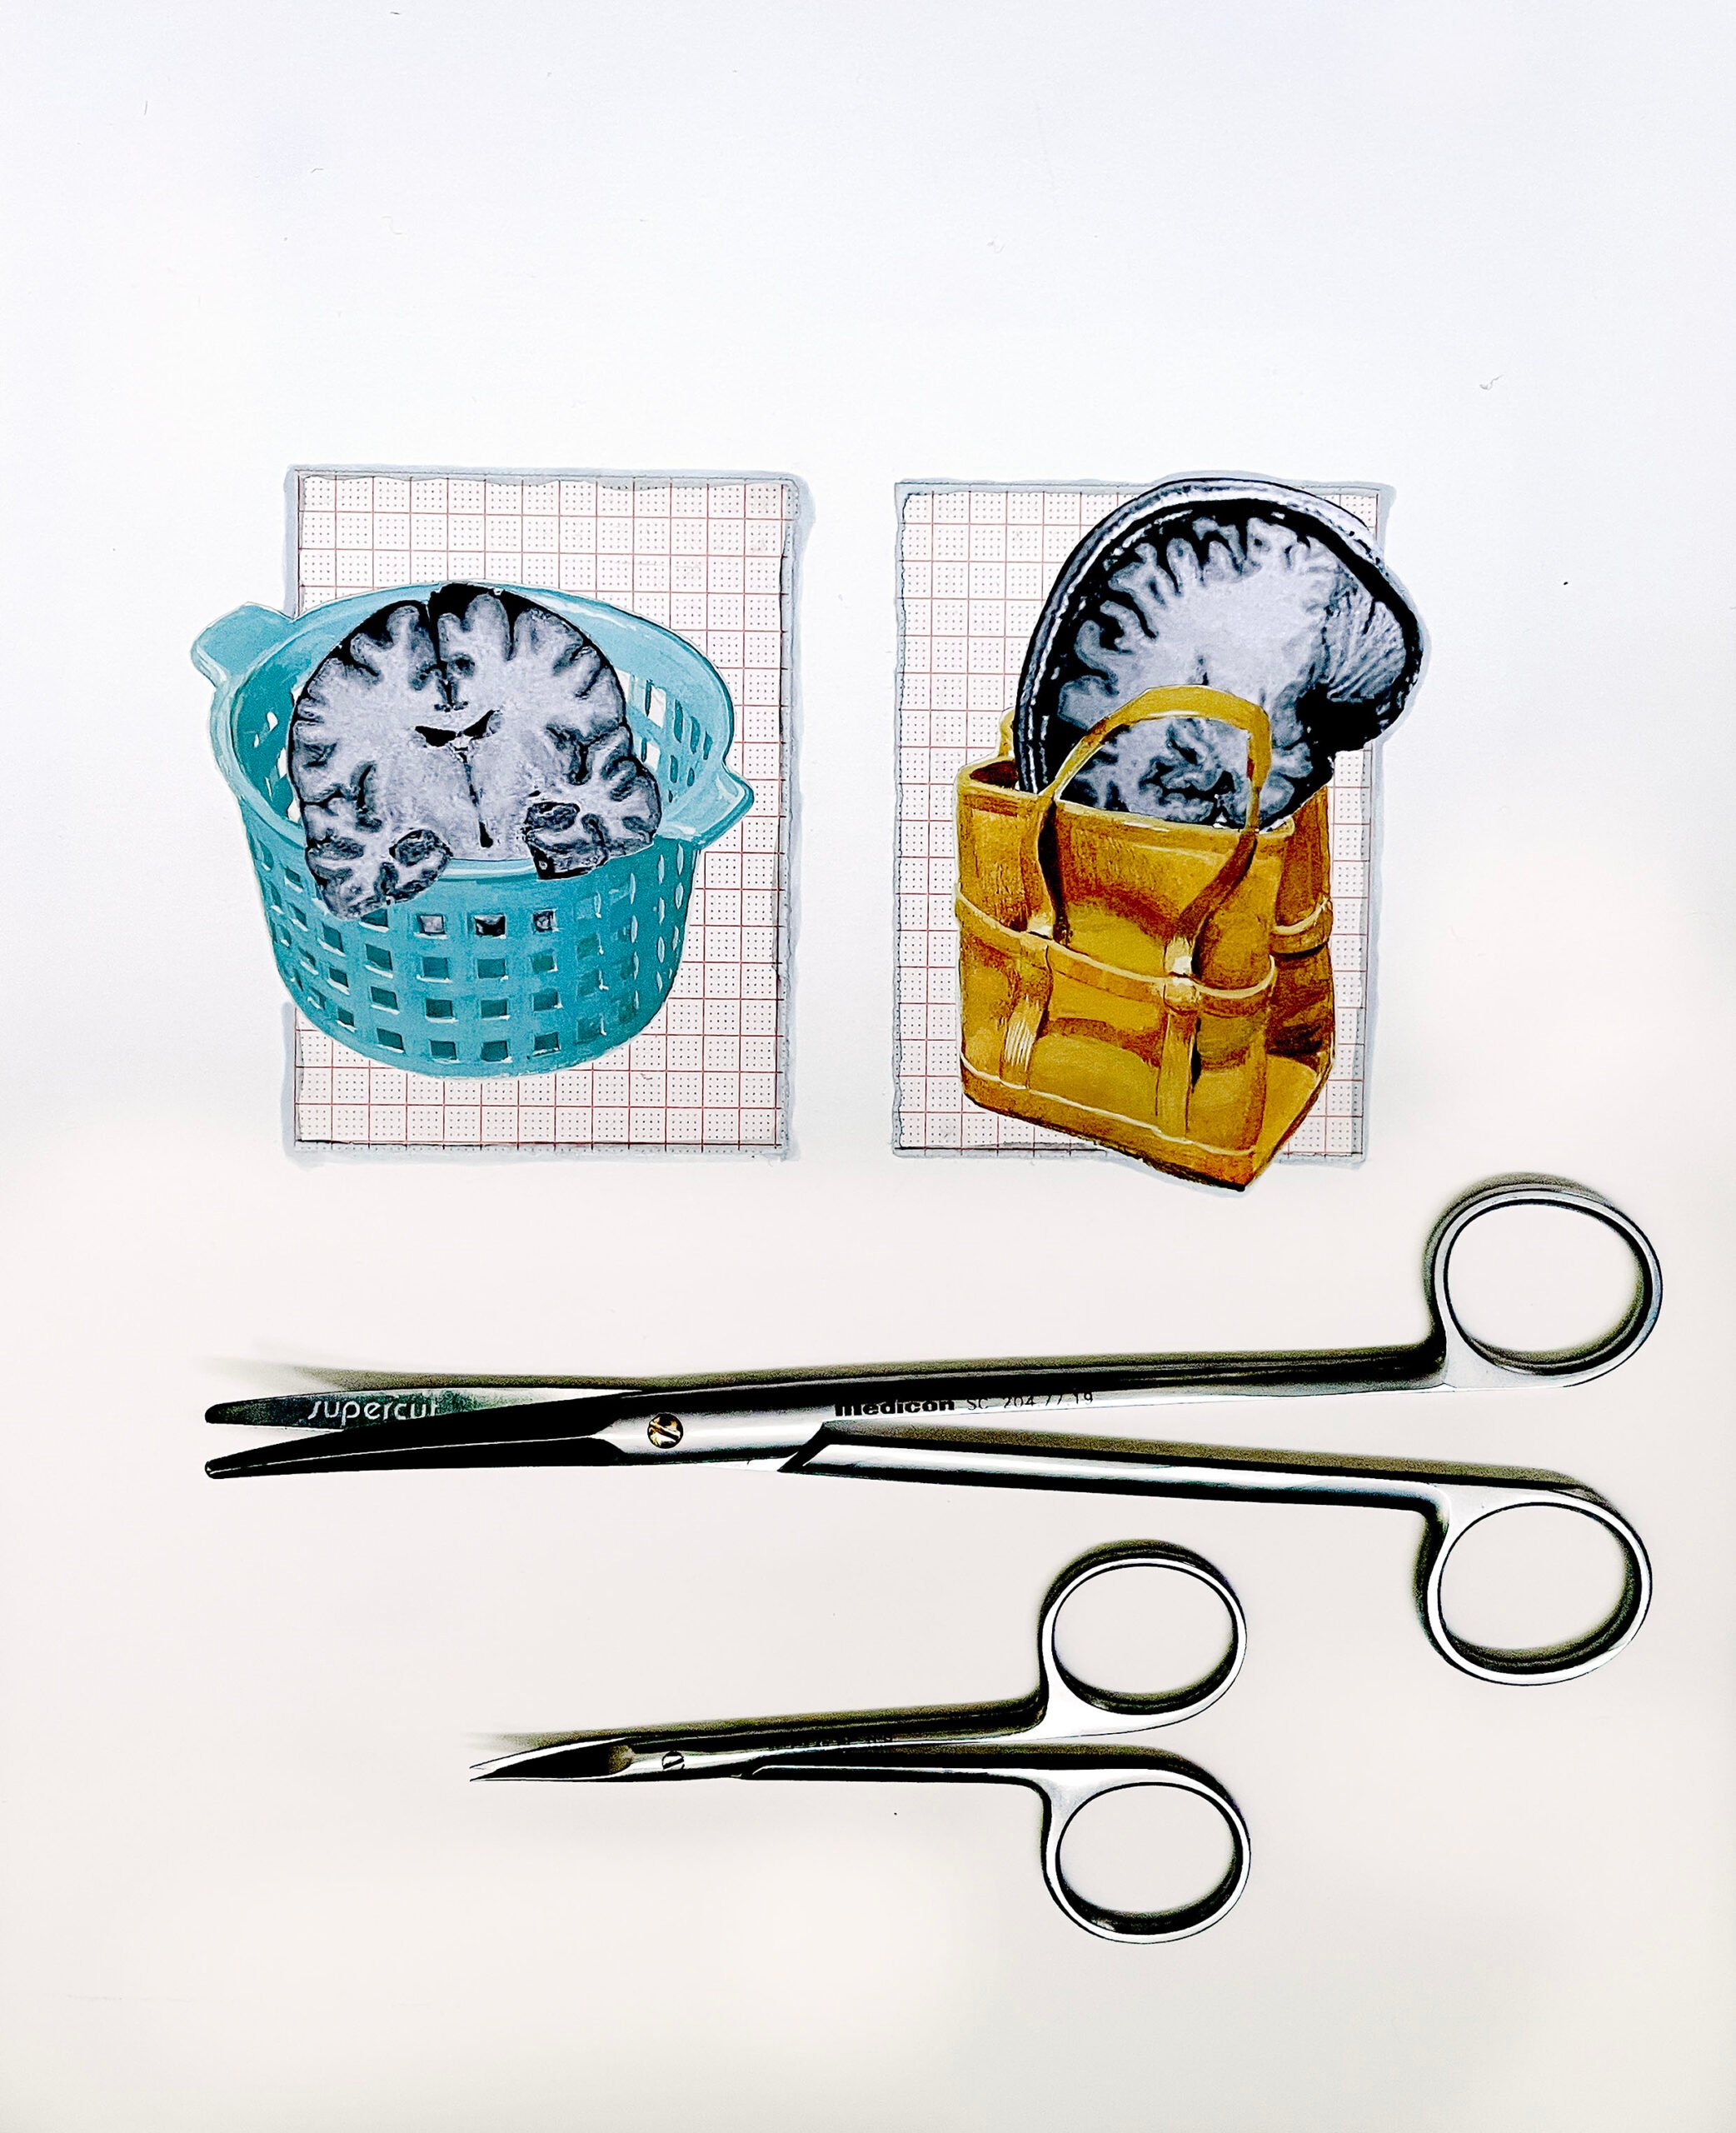 Collage of brain image cutouts rest in a basket and a bag, with two metal scissors positioned below